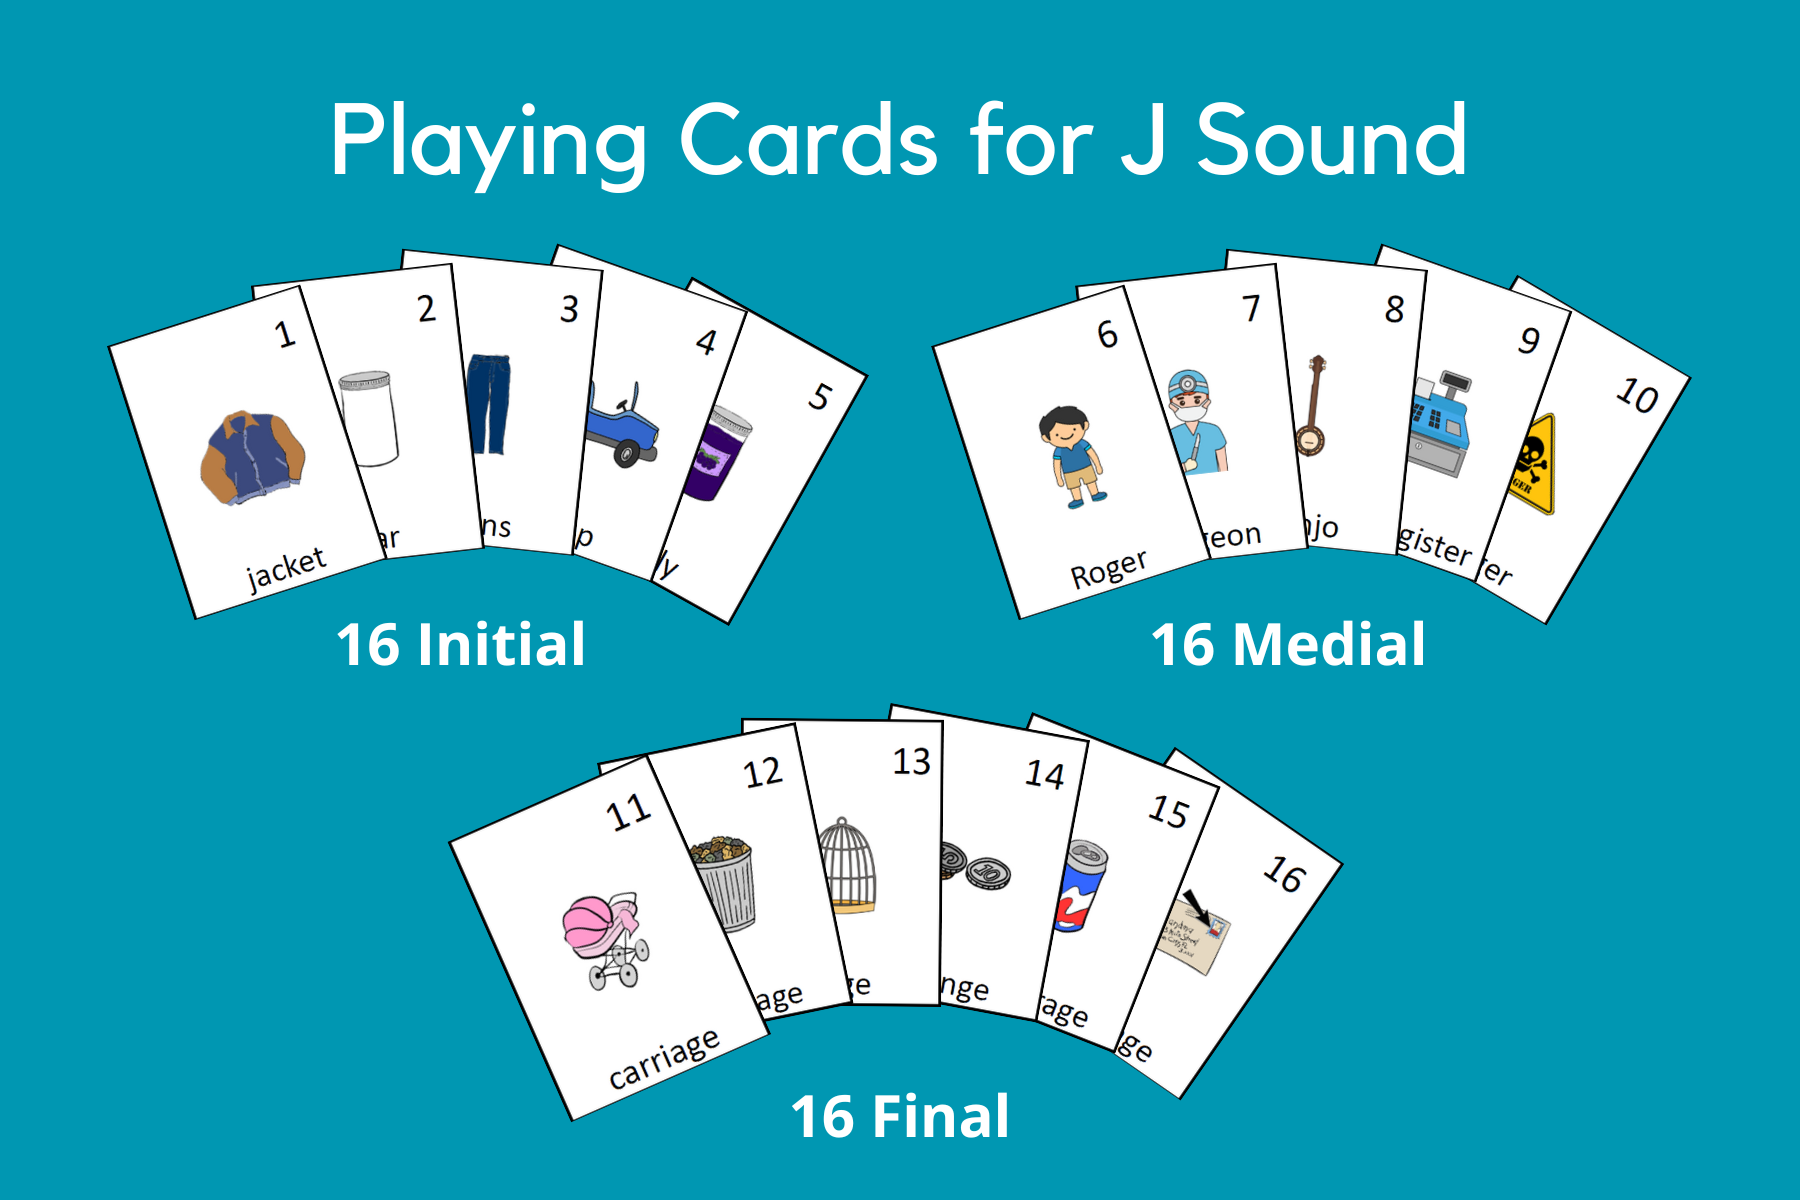 Playing Cards for J Sound